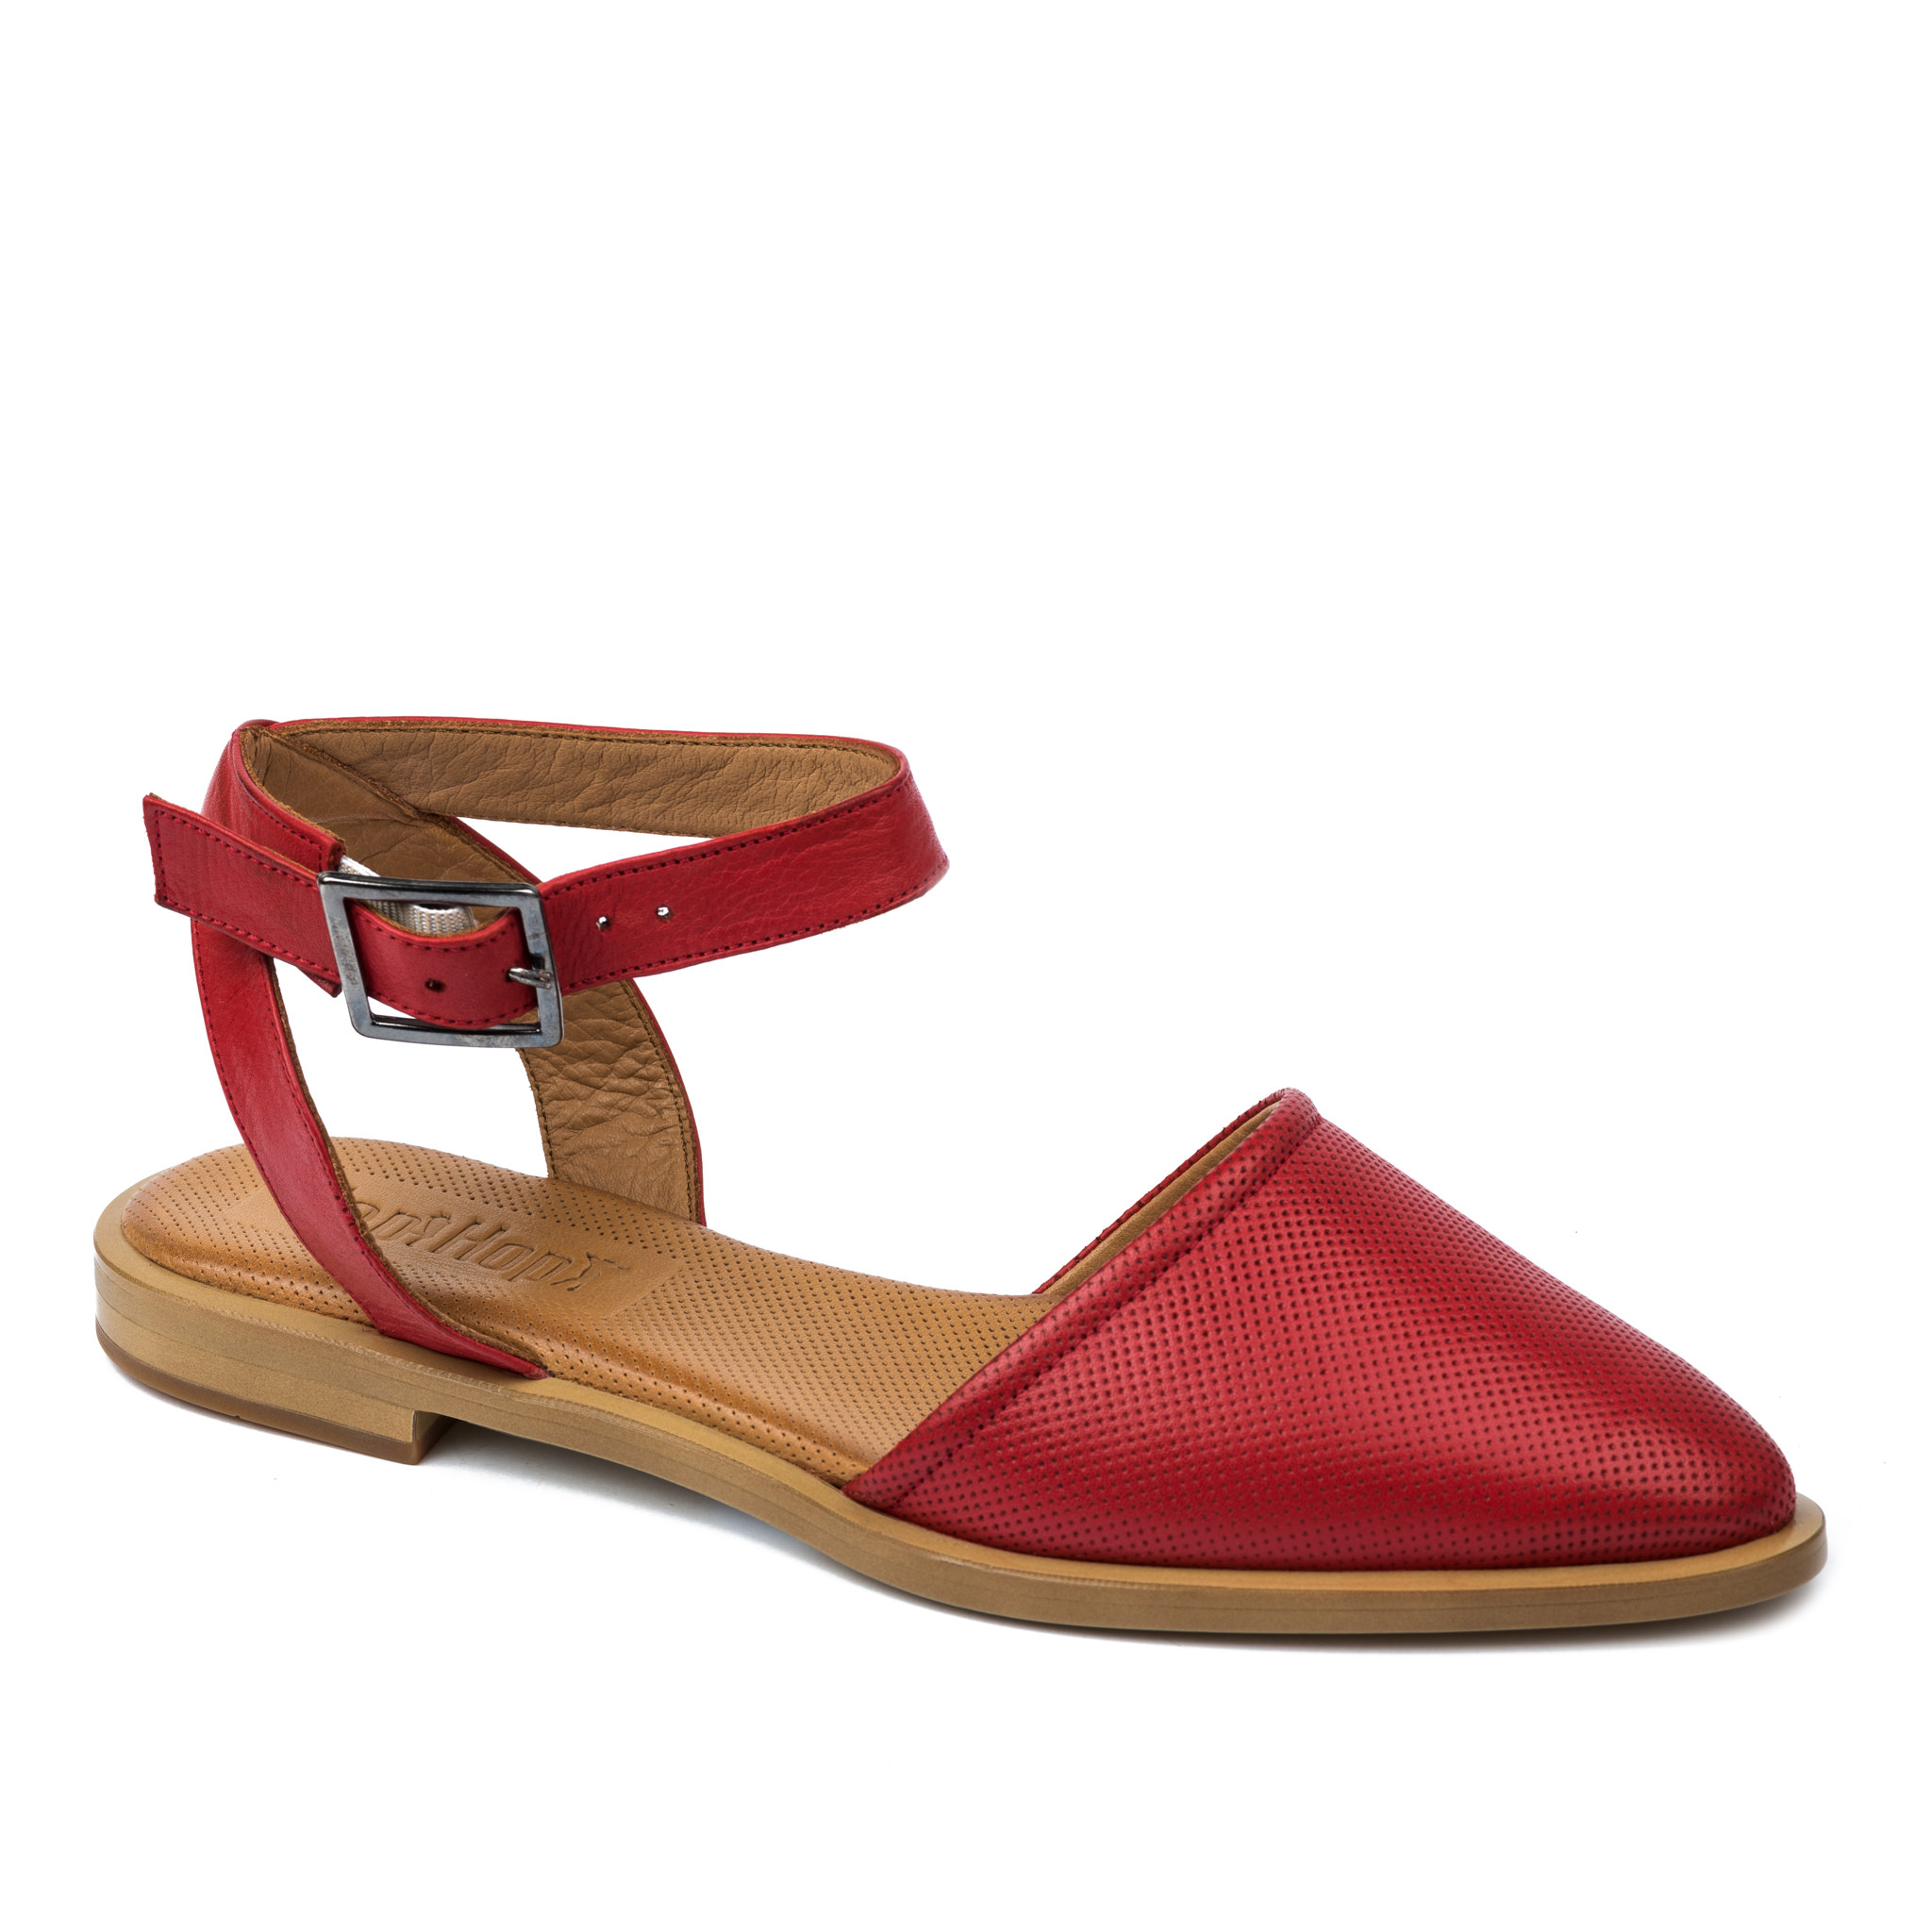 Leather sandals A697 - RED